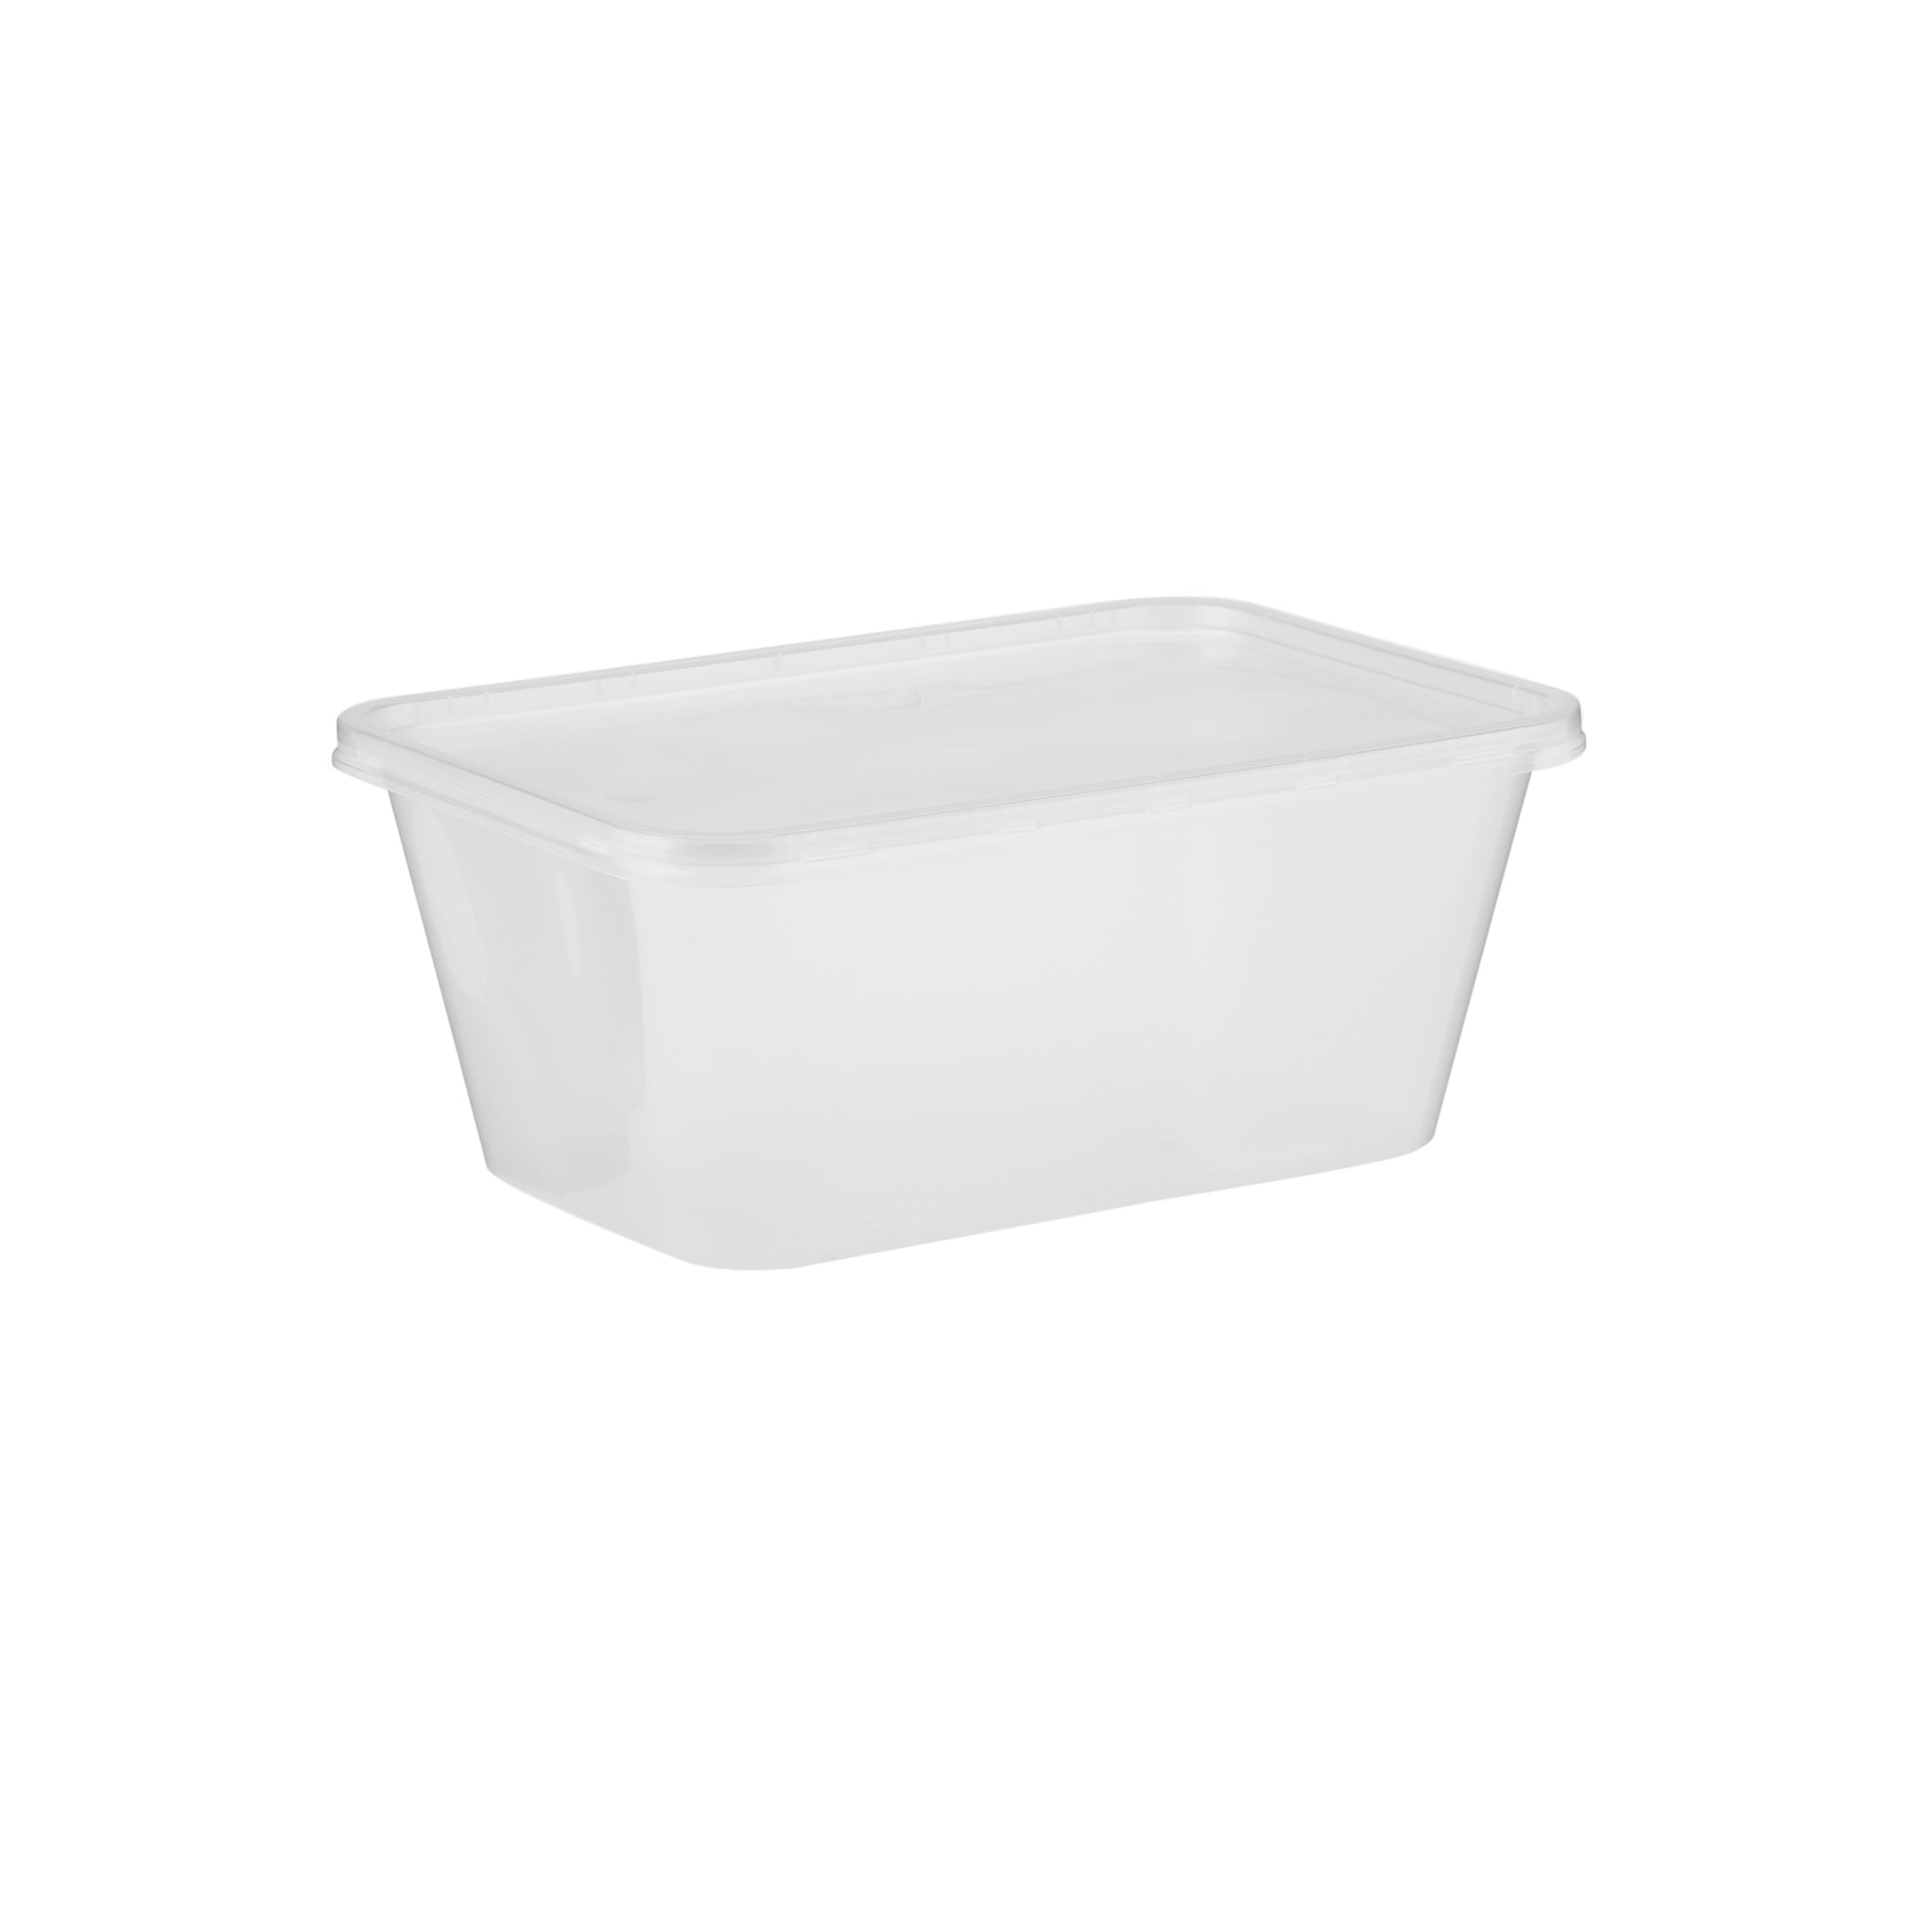 Clear Rectangle Microwavable Container 1000ml - Hotpack Global